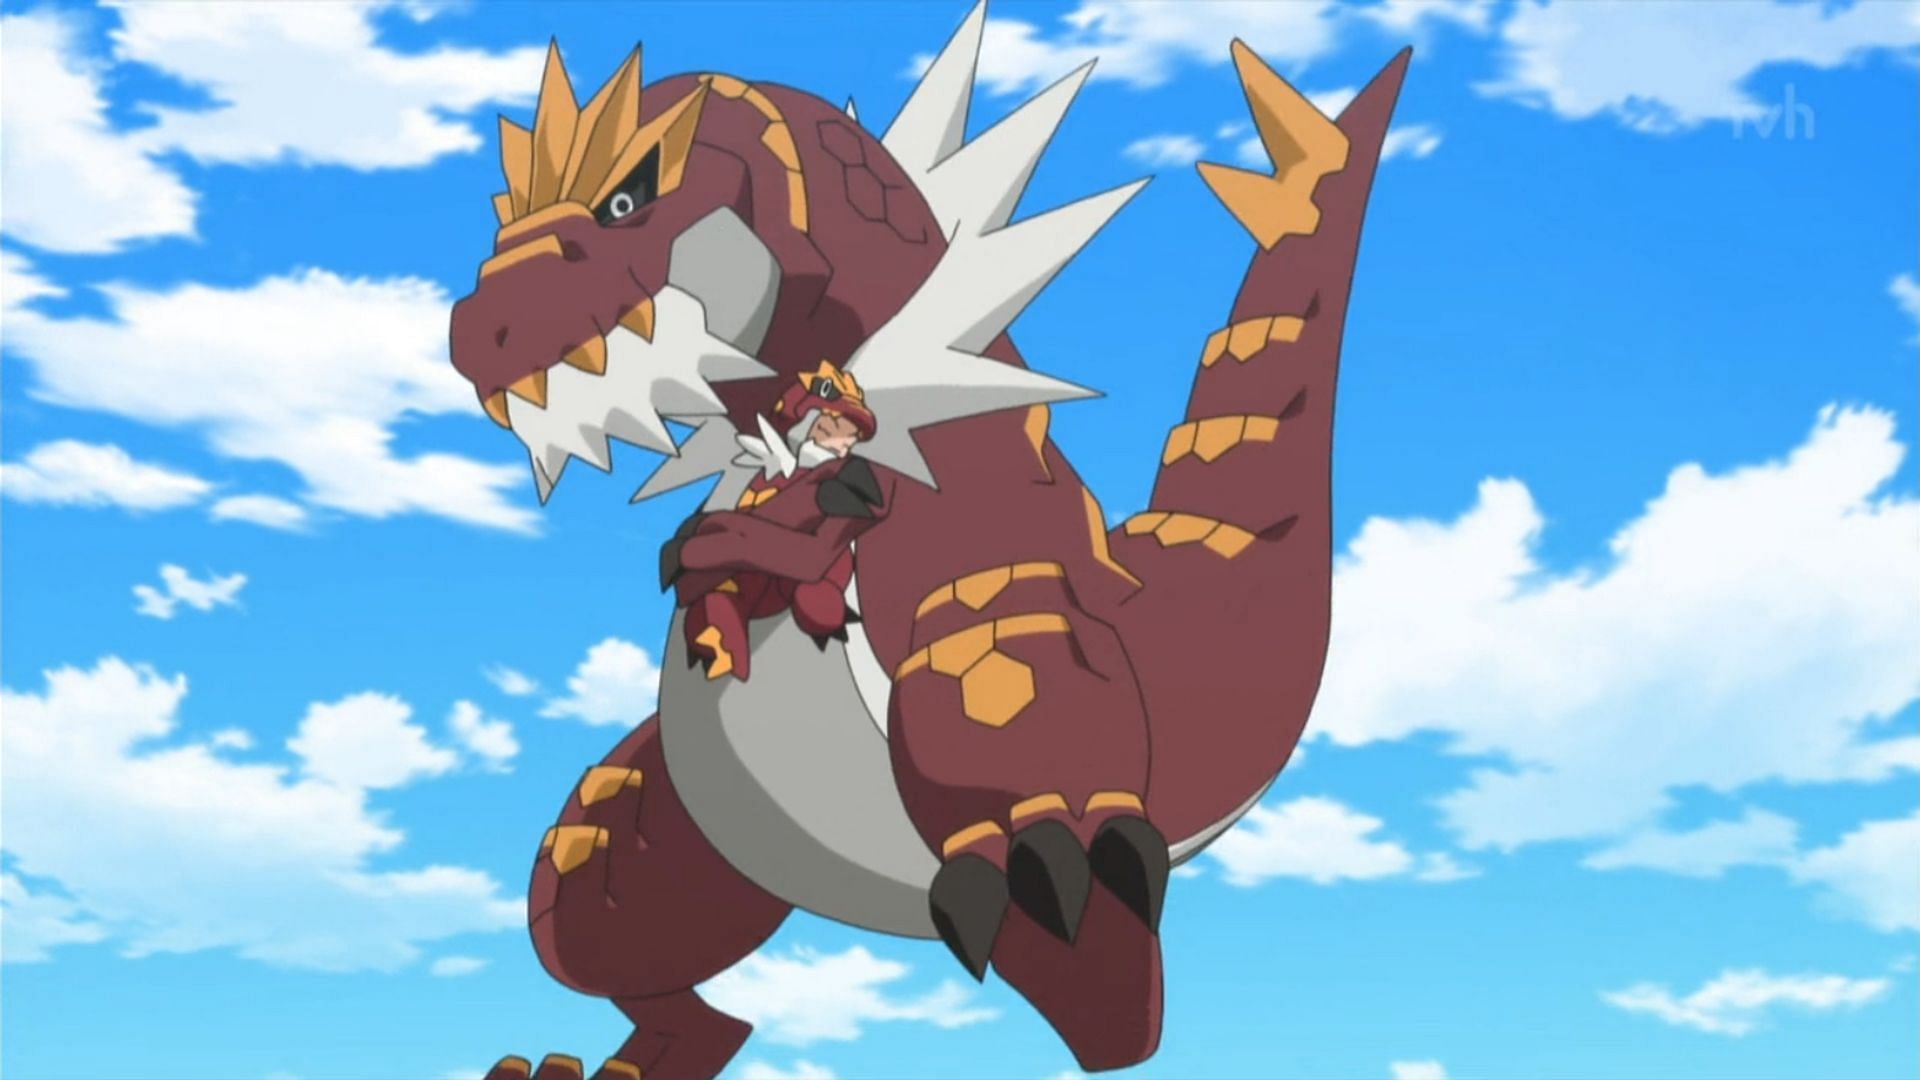 Tyrantrum as it appears in the anime (Image via The Pokemon Company)